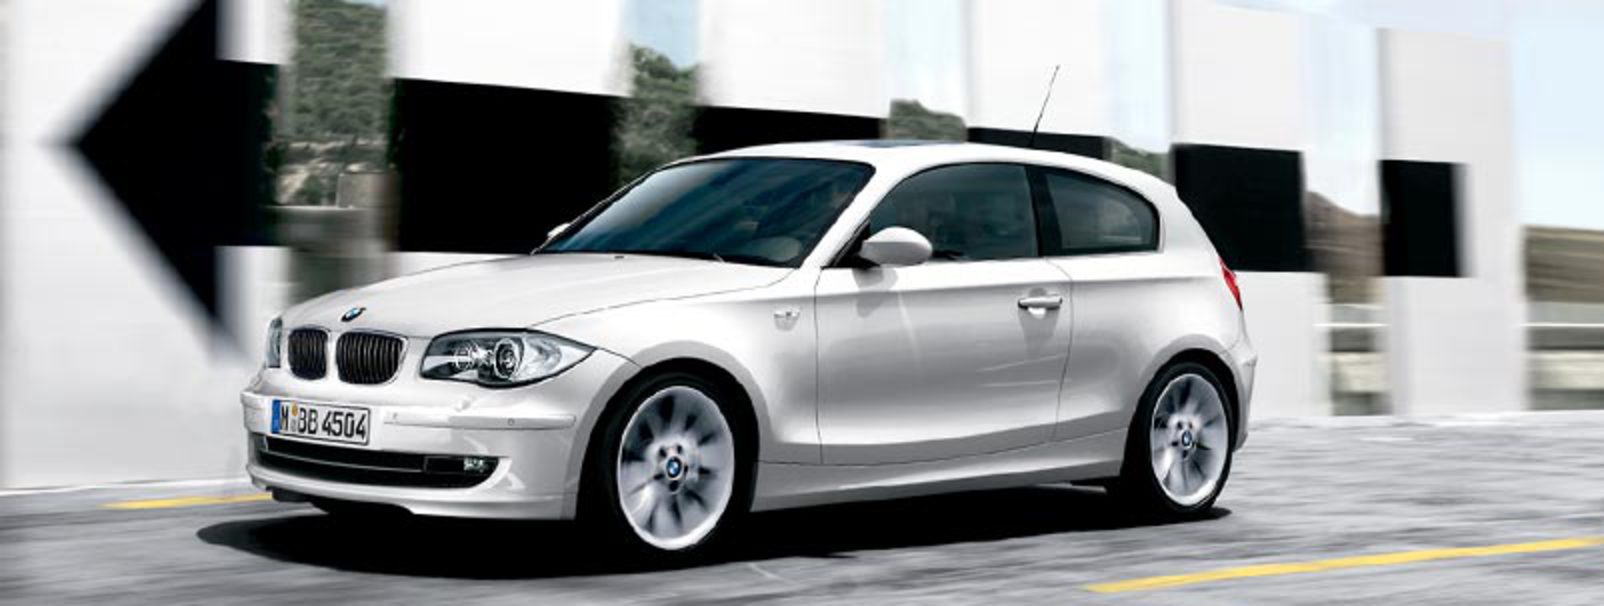 The BMW 130i offers five new DSC functions: